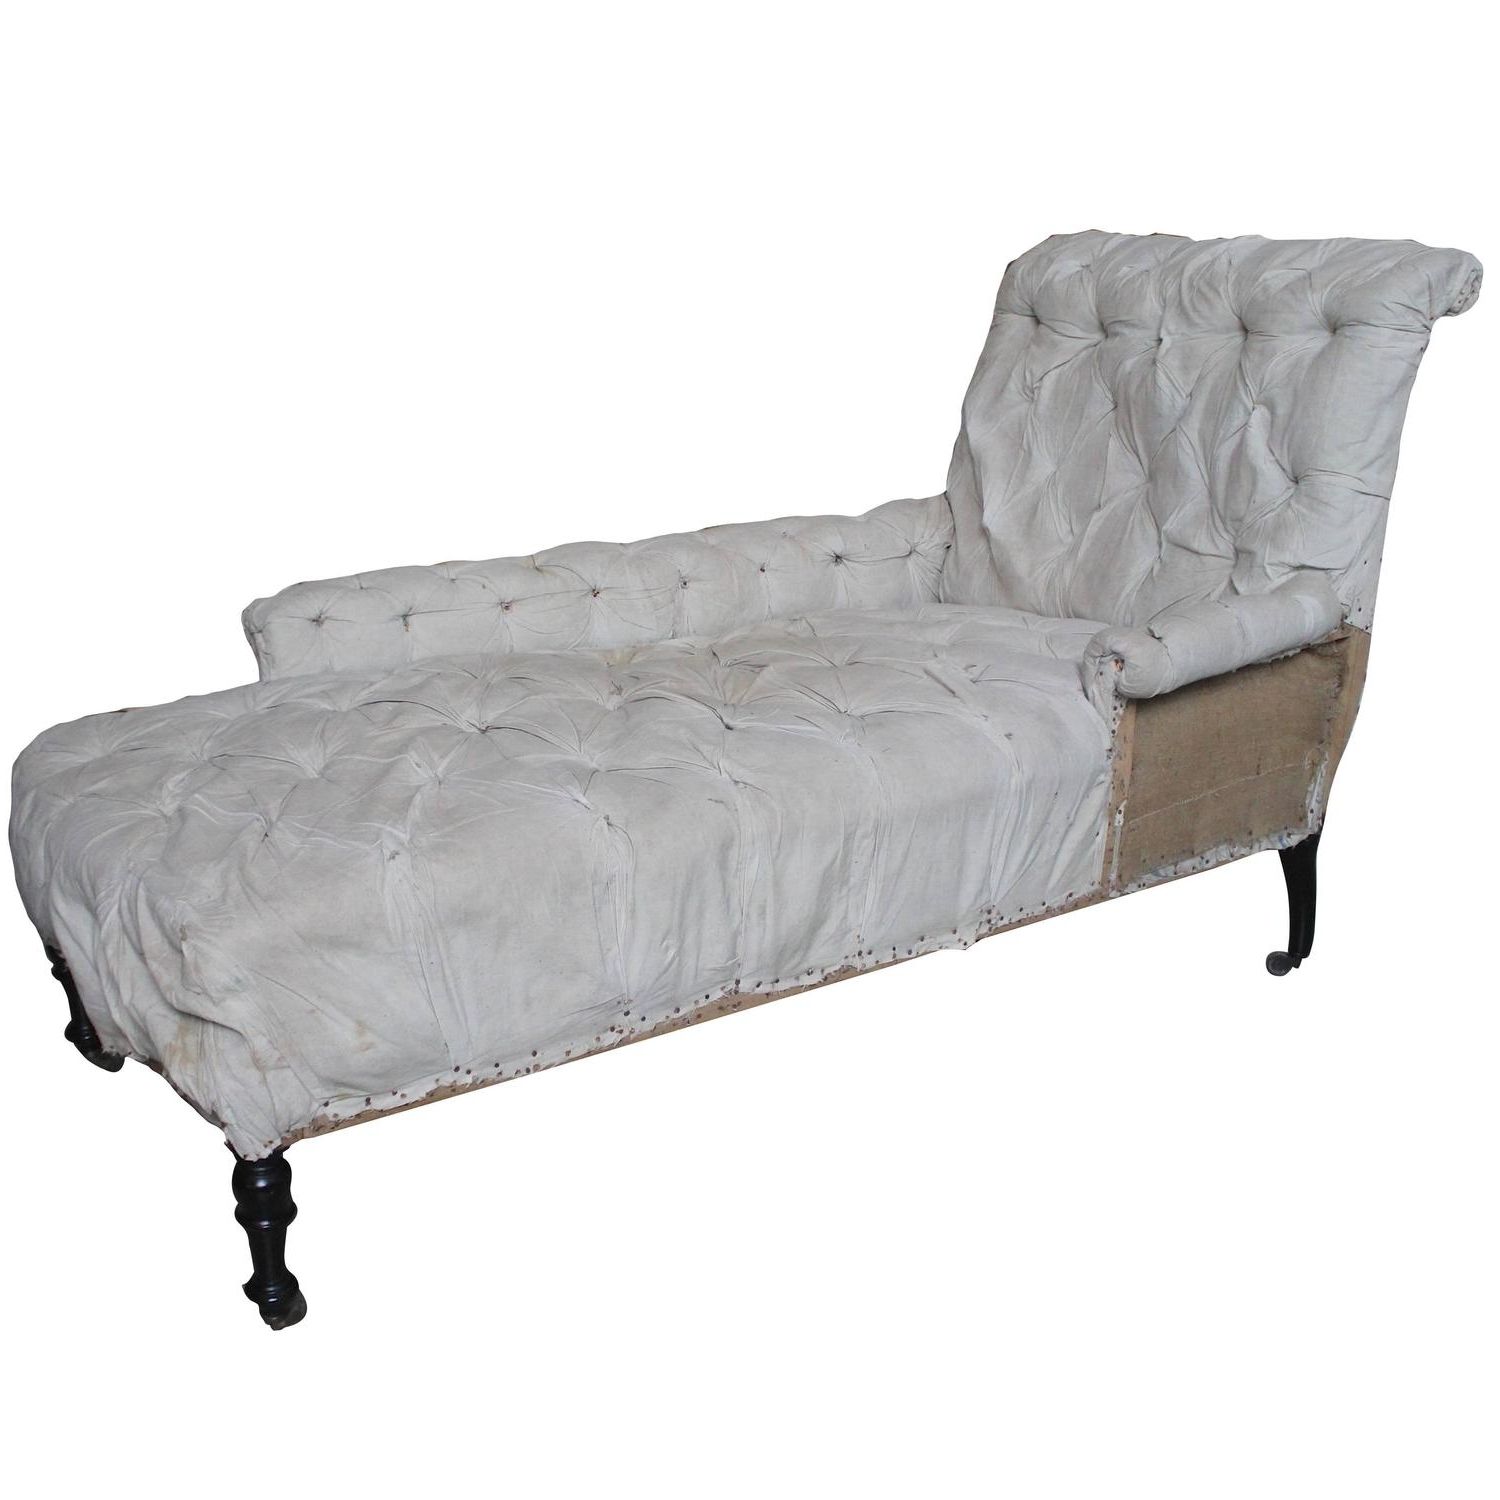 Tufted Chaise Lounges For Well Known French 19th Century Napoleon Iii Tufted Chaise Longue With One (View 6 of 15)